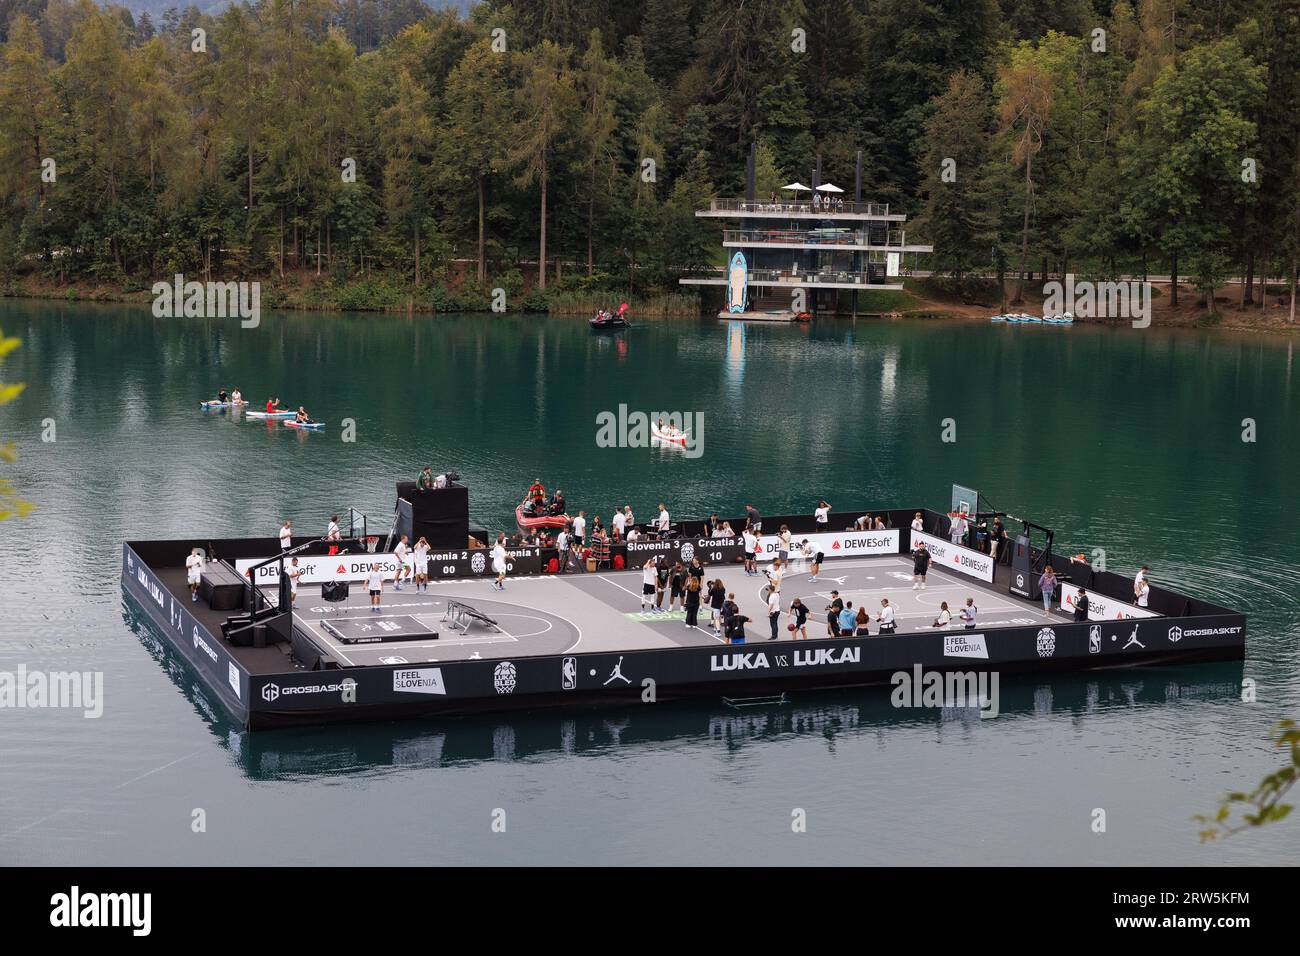 Bled, Slovenia. 16th Sep, 2023. A basketball tournament takes place on the  surface of Lake Bled during the unveiling event of Luka 2 Lake Bled, Luka  Doncic's second signature Jordan brand shoe.